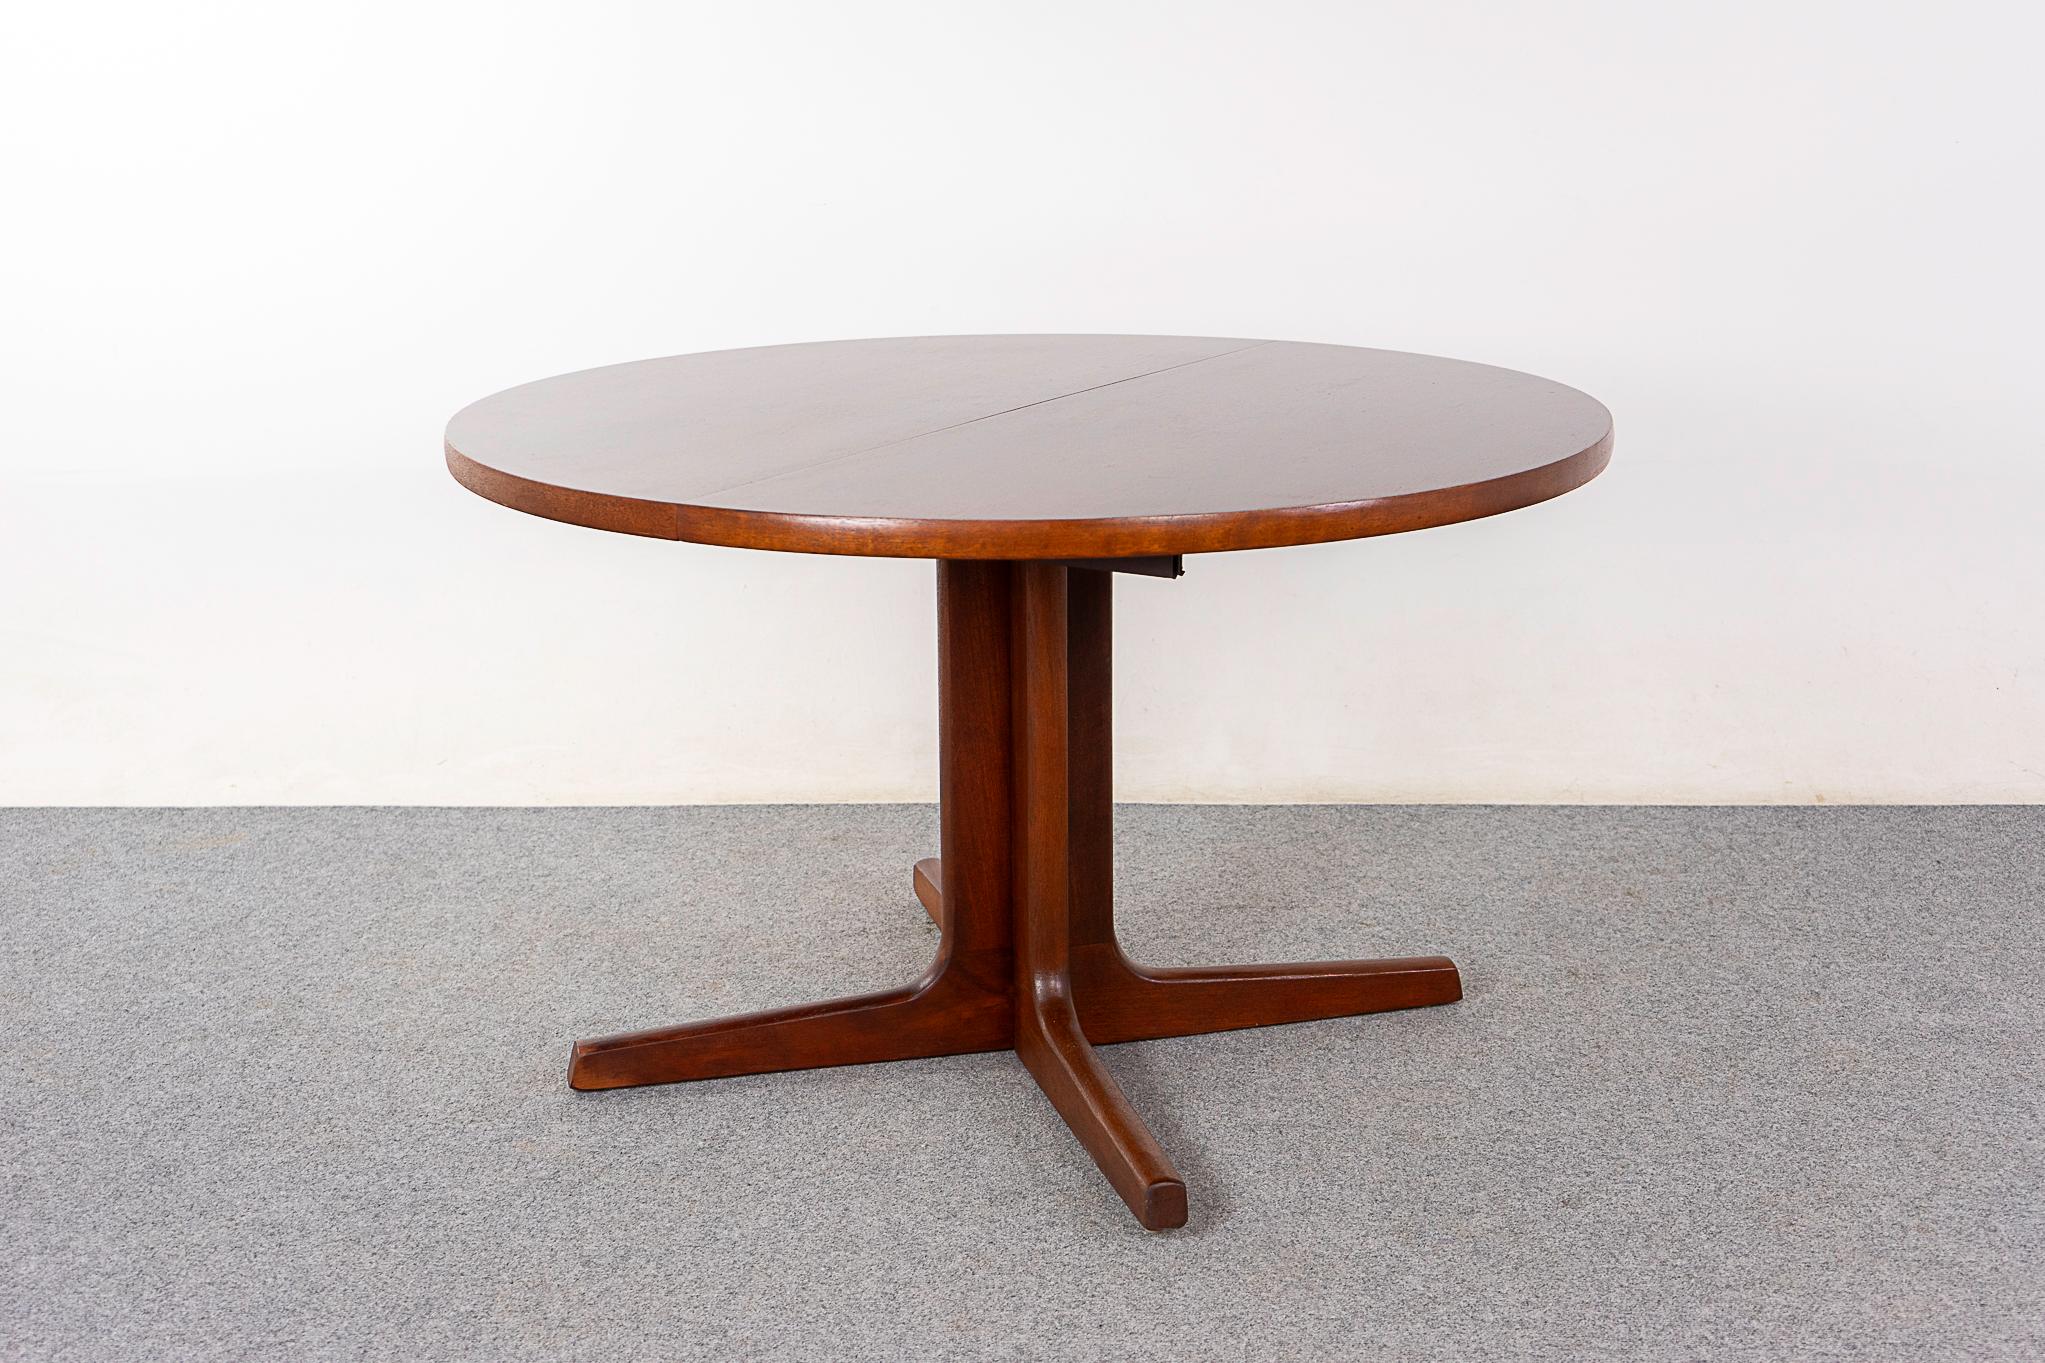 Rosewood Danish dining table, circa 1990's. Sculpted pedestal base opens with the table top to increase the stability when extended. Perfect for 4 or 6 guests!

Restoration unavailable, sold as is. 

Made in Denmark
Circa 1990's
48